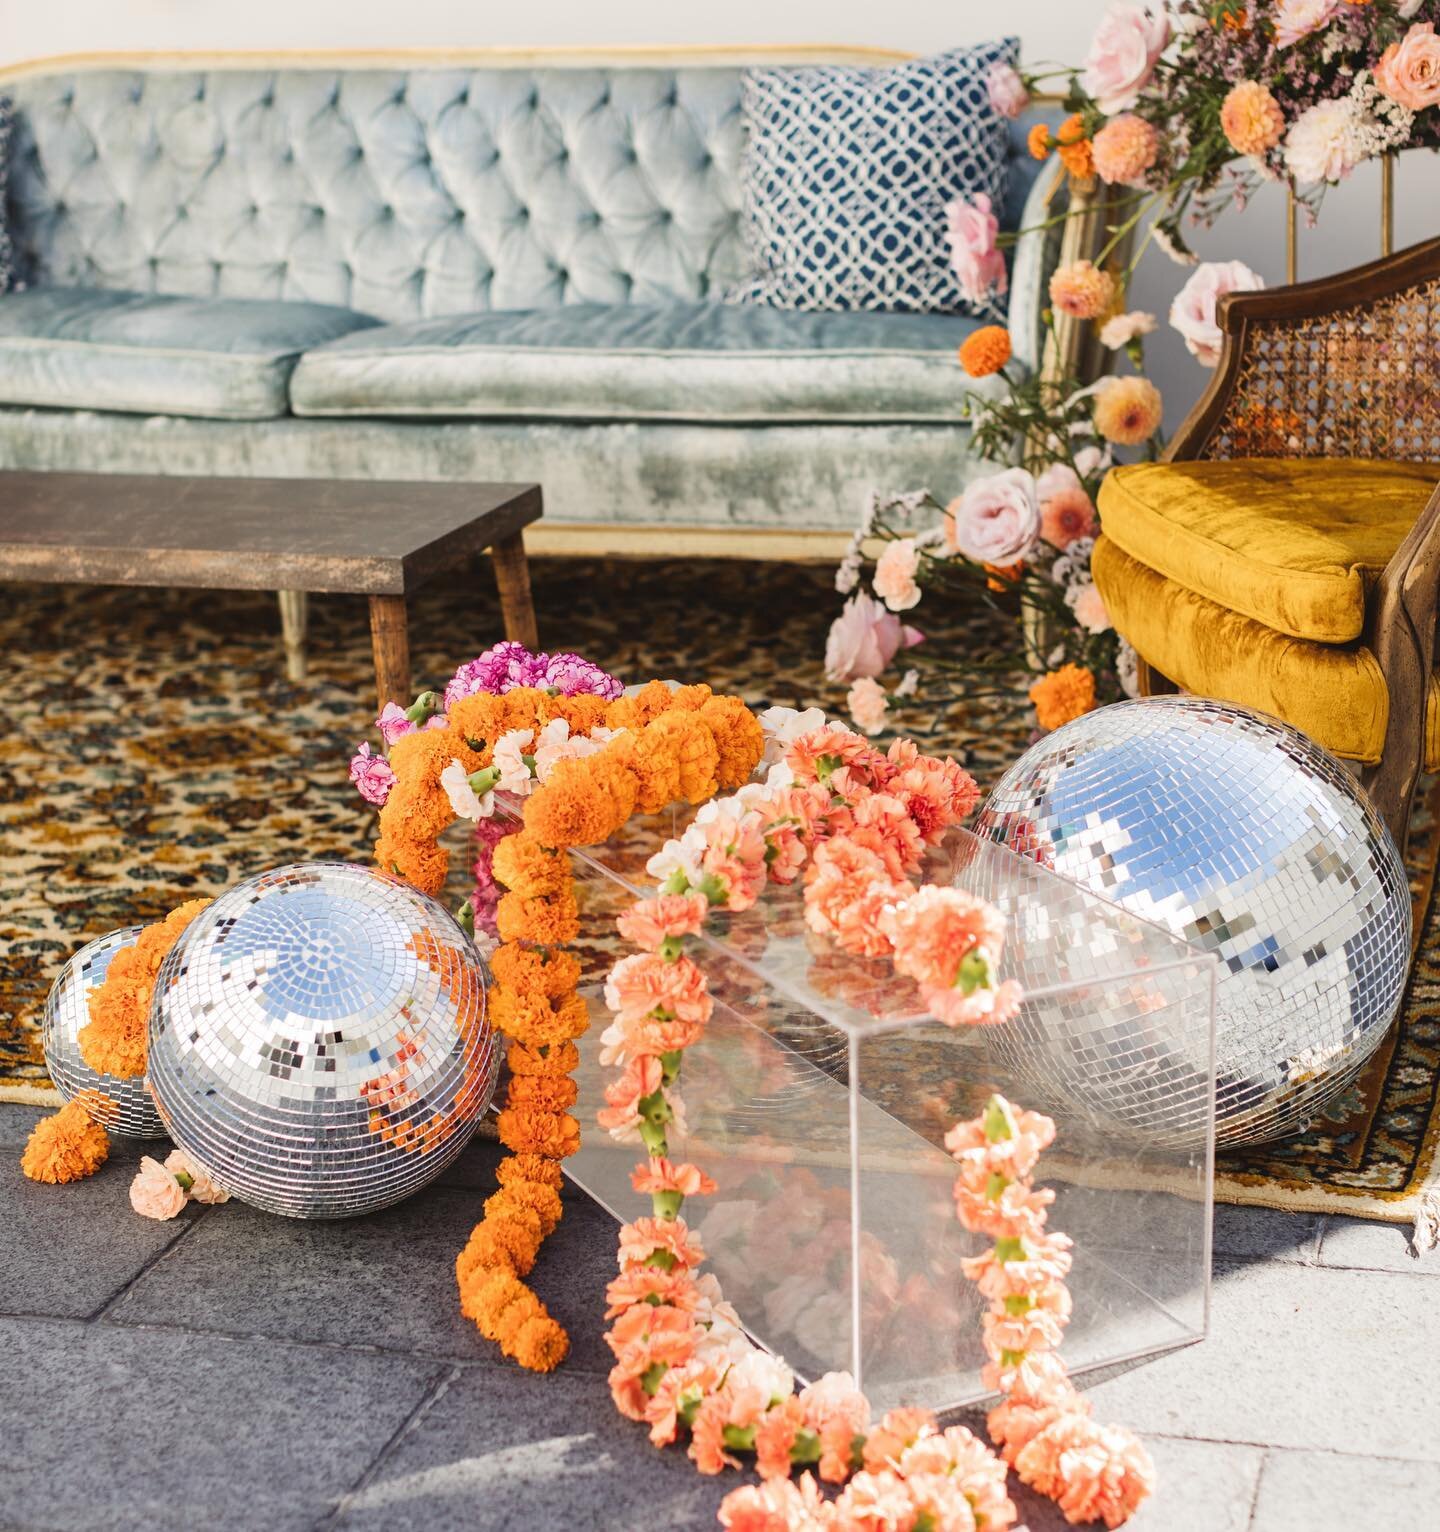 M+V&rsquo;s wedding was inspired by the citrus notes and accents of bright florals. This bright color palette was certainly a fresh of breath air! 

Planning and Design: Harlene Events
Venue: @blancourbanvenue 
Photographer: @zoelarkinphoto 
Florals: